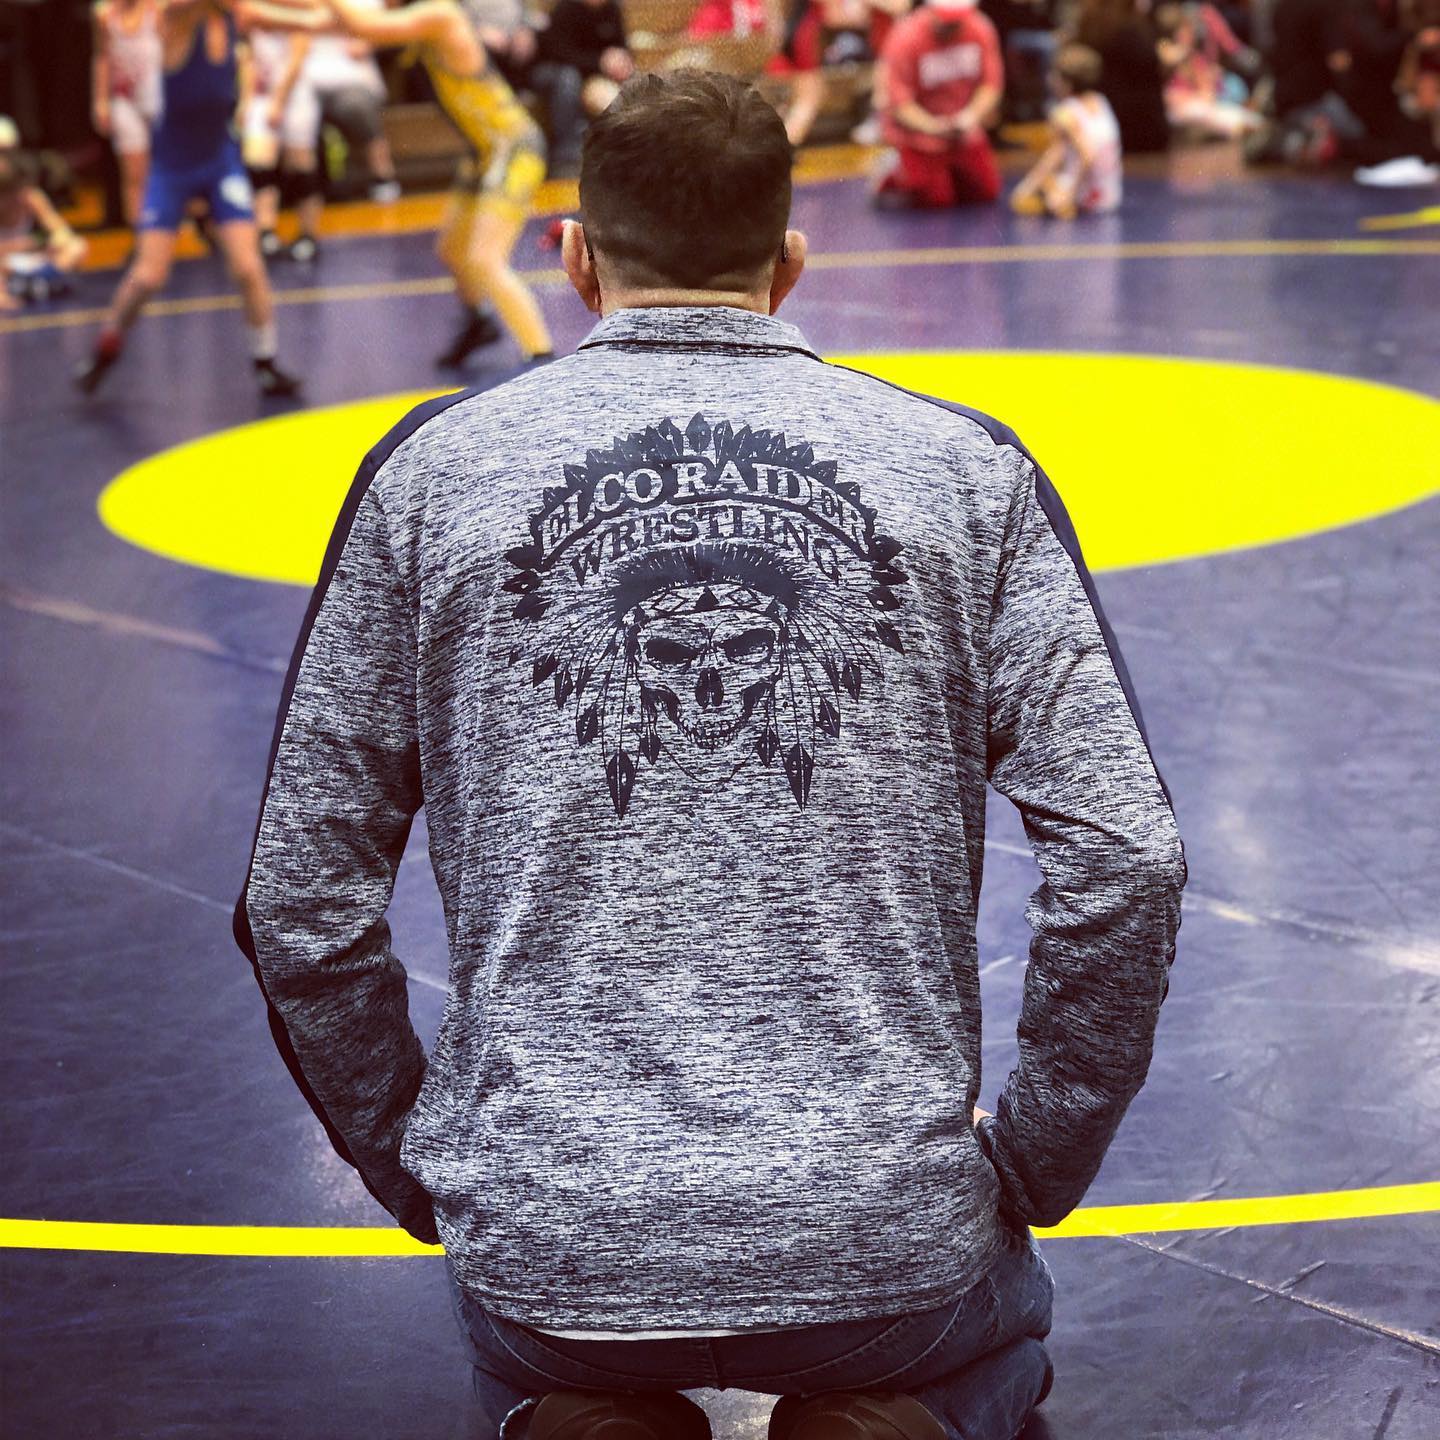 ben moser, youth wrestling, ELCO, Eastern Lebanon County School District